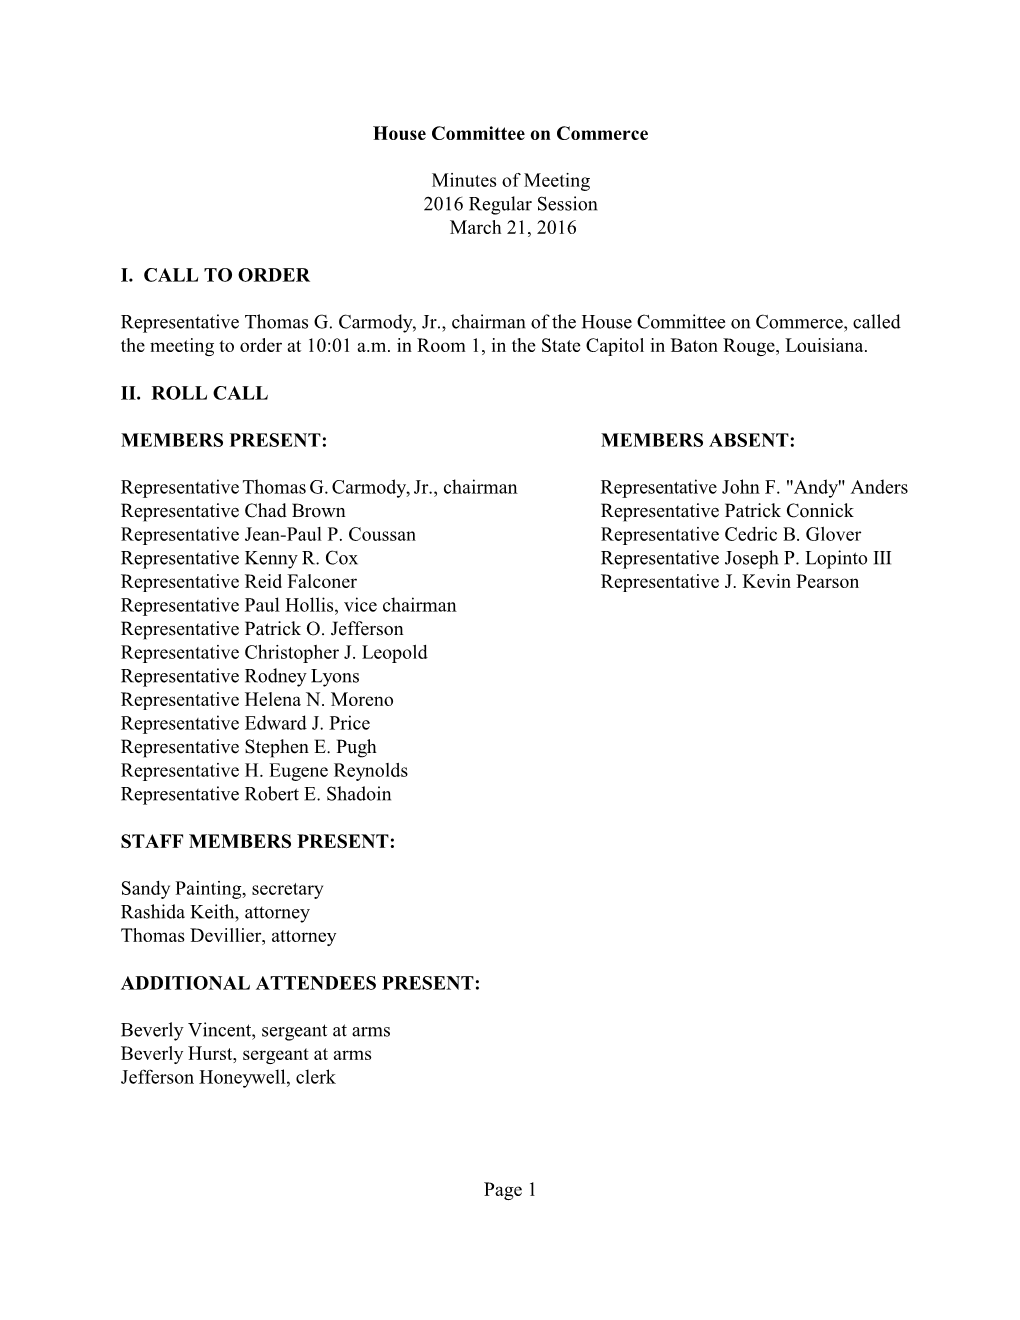 House Committee on Commerce Minutes of Meeting 2016 Regular